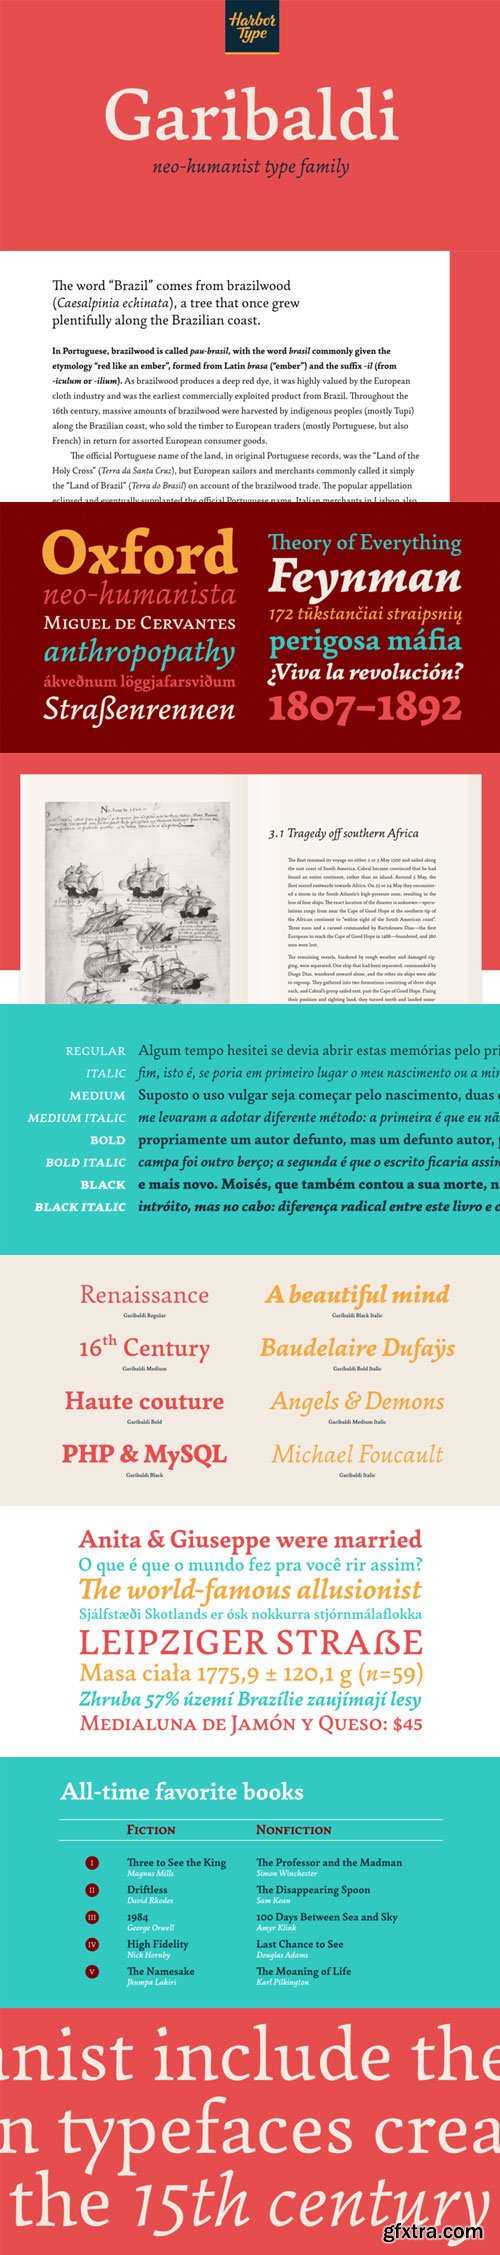 Garibaldi - A Text Typeface Based on Humanist Calligraphy NEW!